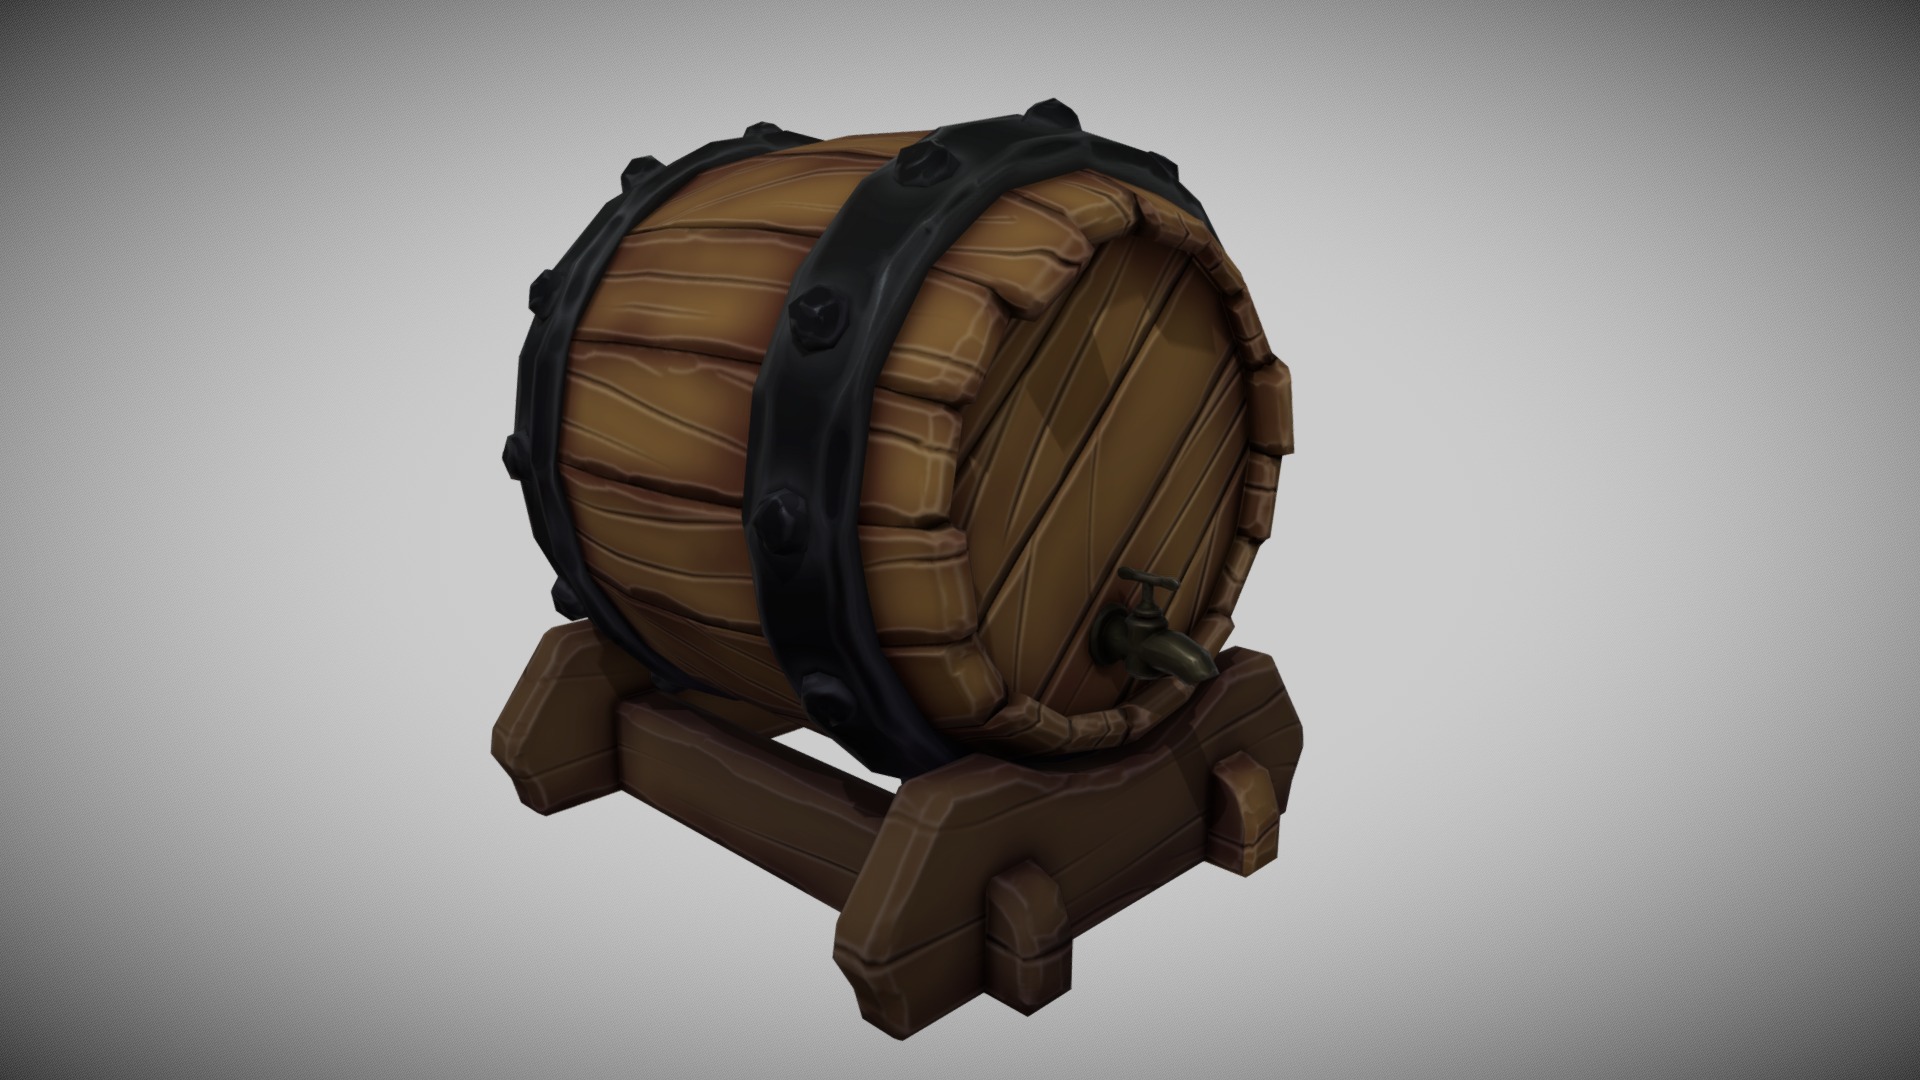 3D model Stylized Barrel - This is a 3D model of the Stylized Barrel. The 3D model is about a brown helmet on a white background.